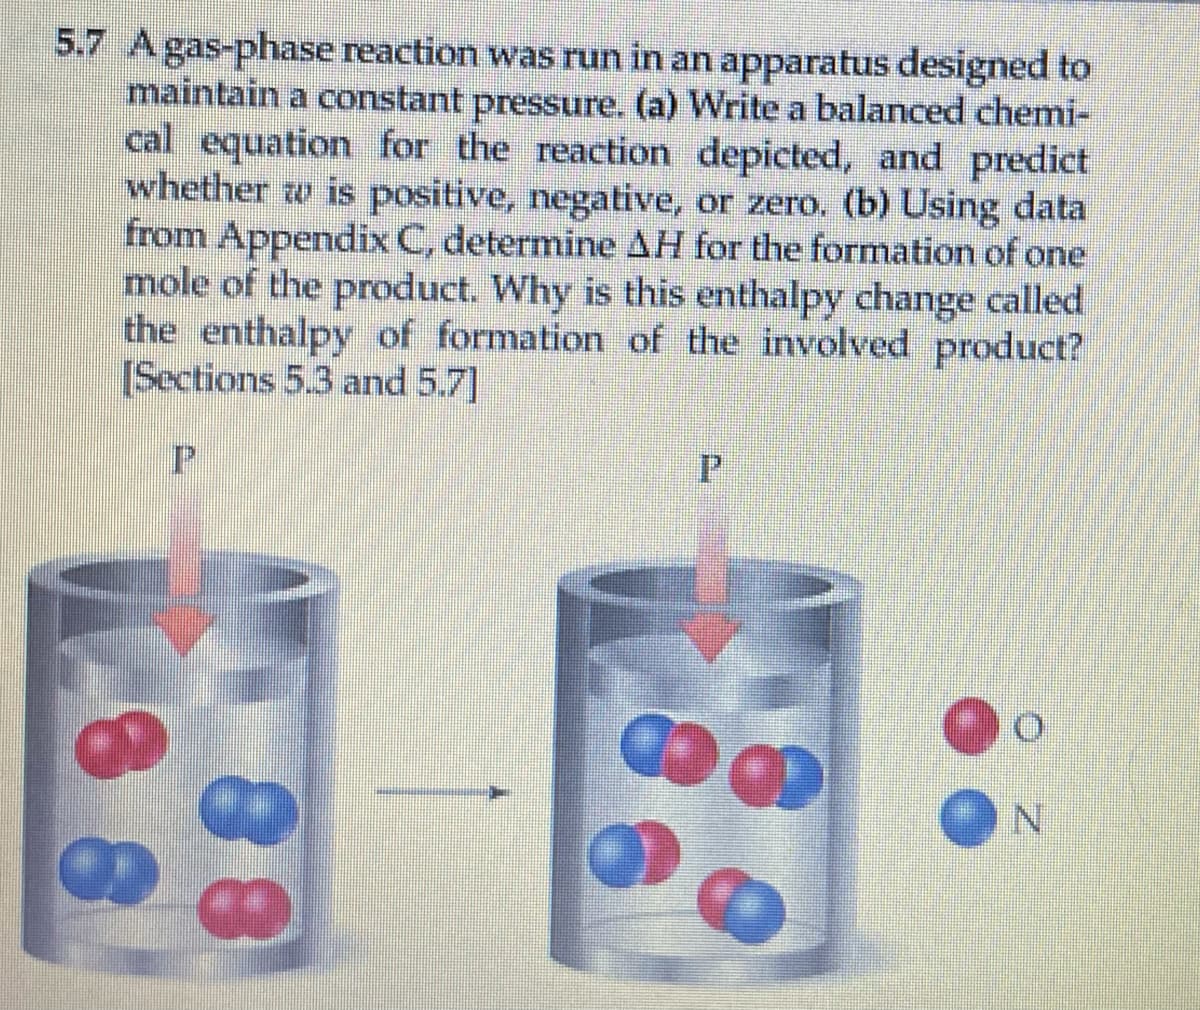 5.7 Agas-phase reaction was run in an apparatus designed to
maintain a constant pressure. (a) Write a balanced chemi-
cal equation for the reaction depicted, and predict
whether w is positive, negative, or zero. (b) Using data
from Appendix C, determine AH for the formation of one
mole of the product. Why is this enthalpy change called
the enthalpy of formation of the involved product?
[Sections 5.3 and 5.7]
P.
